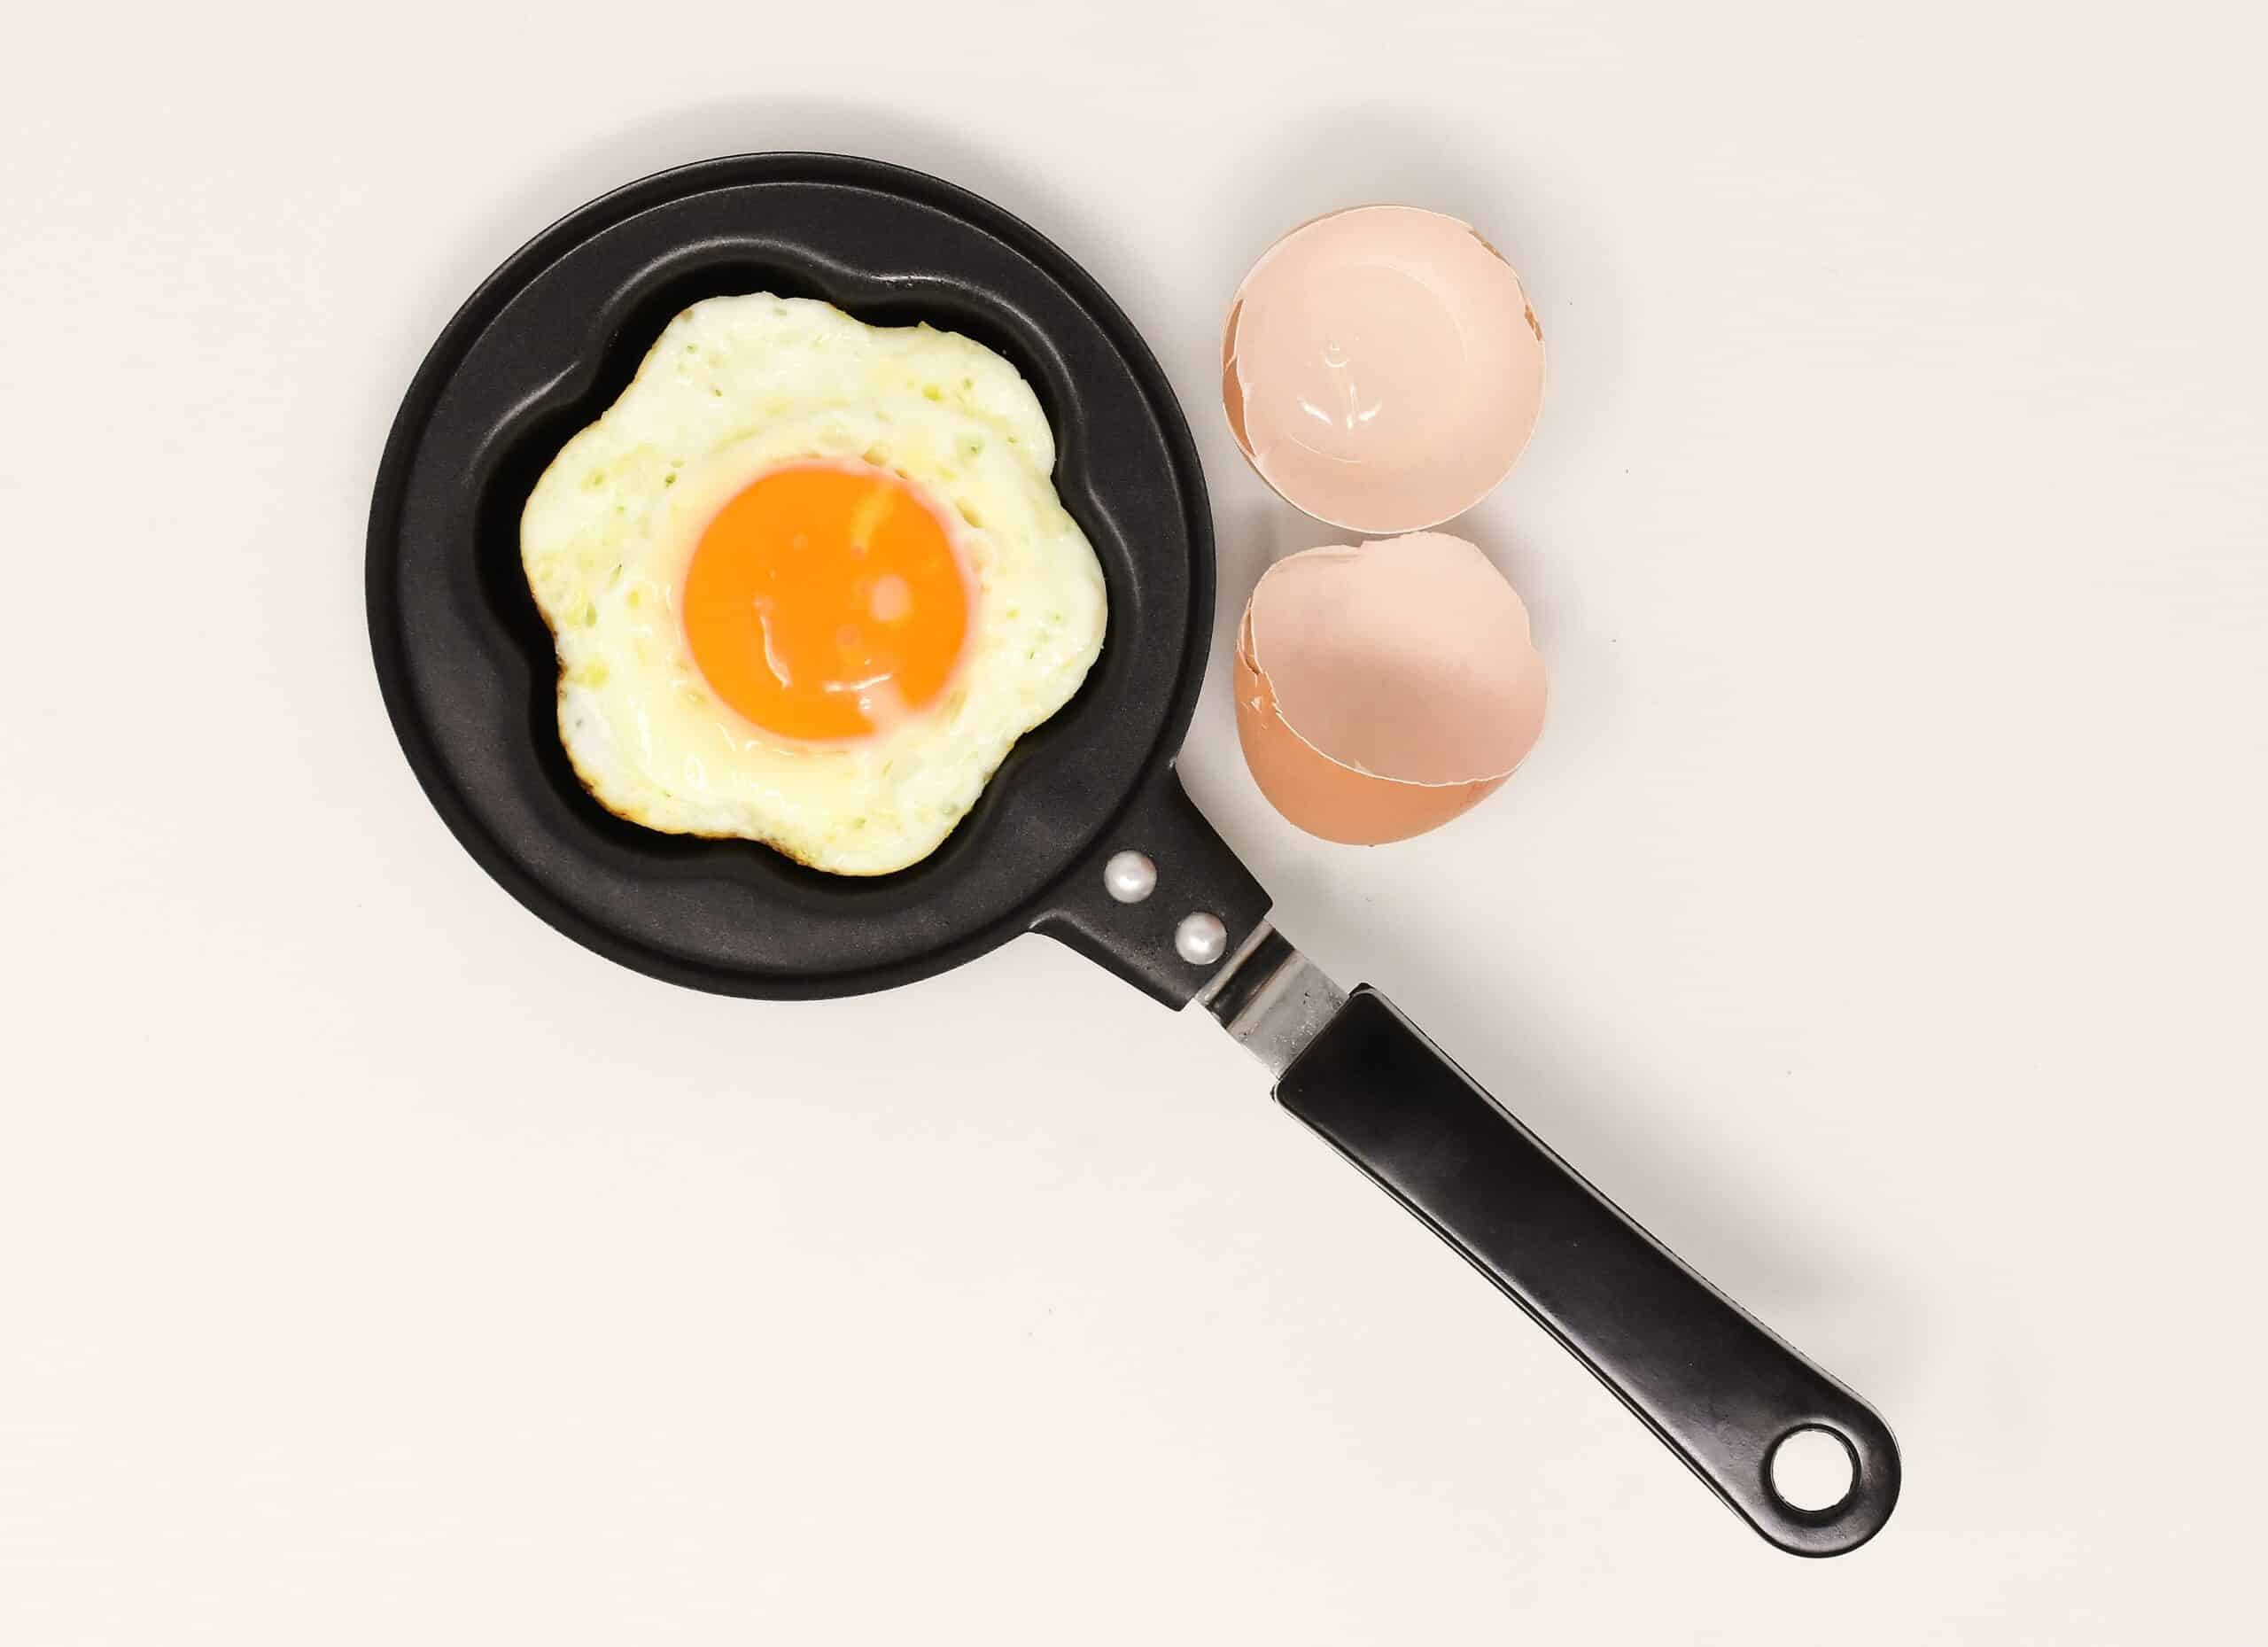 sunny side up egg to beat demoralization during graduate school